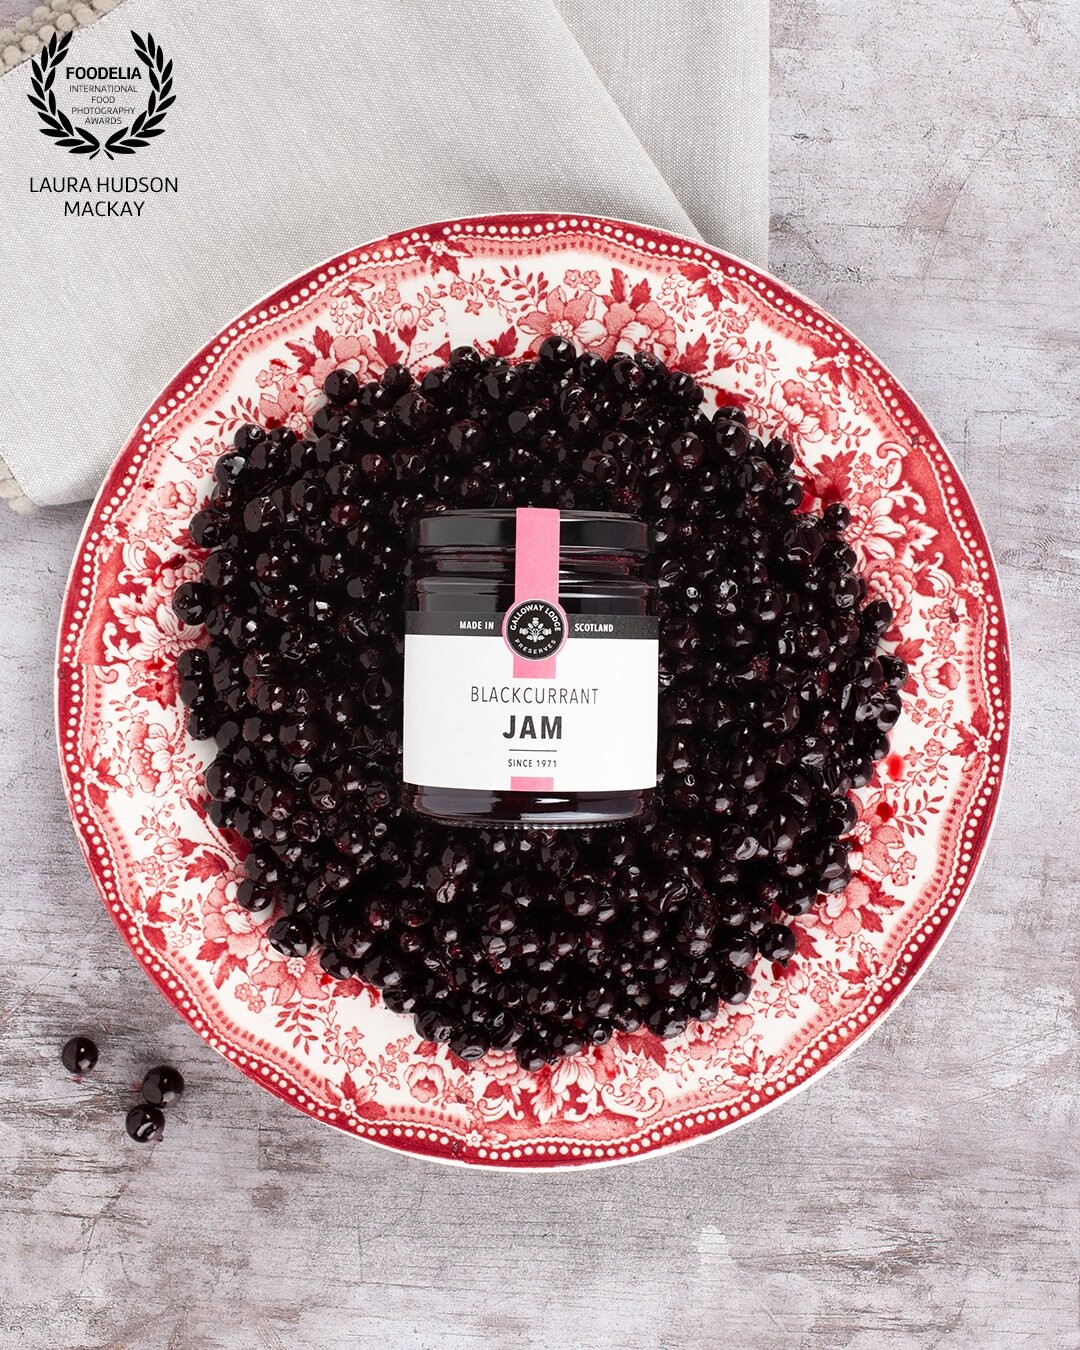 A delicious product, a beautiful new plate and hundreds of blackcurrants called for a fun (and quite messy) overhead photoshoot.